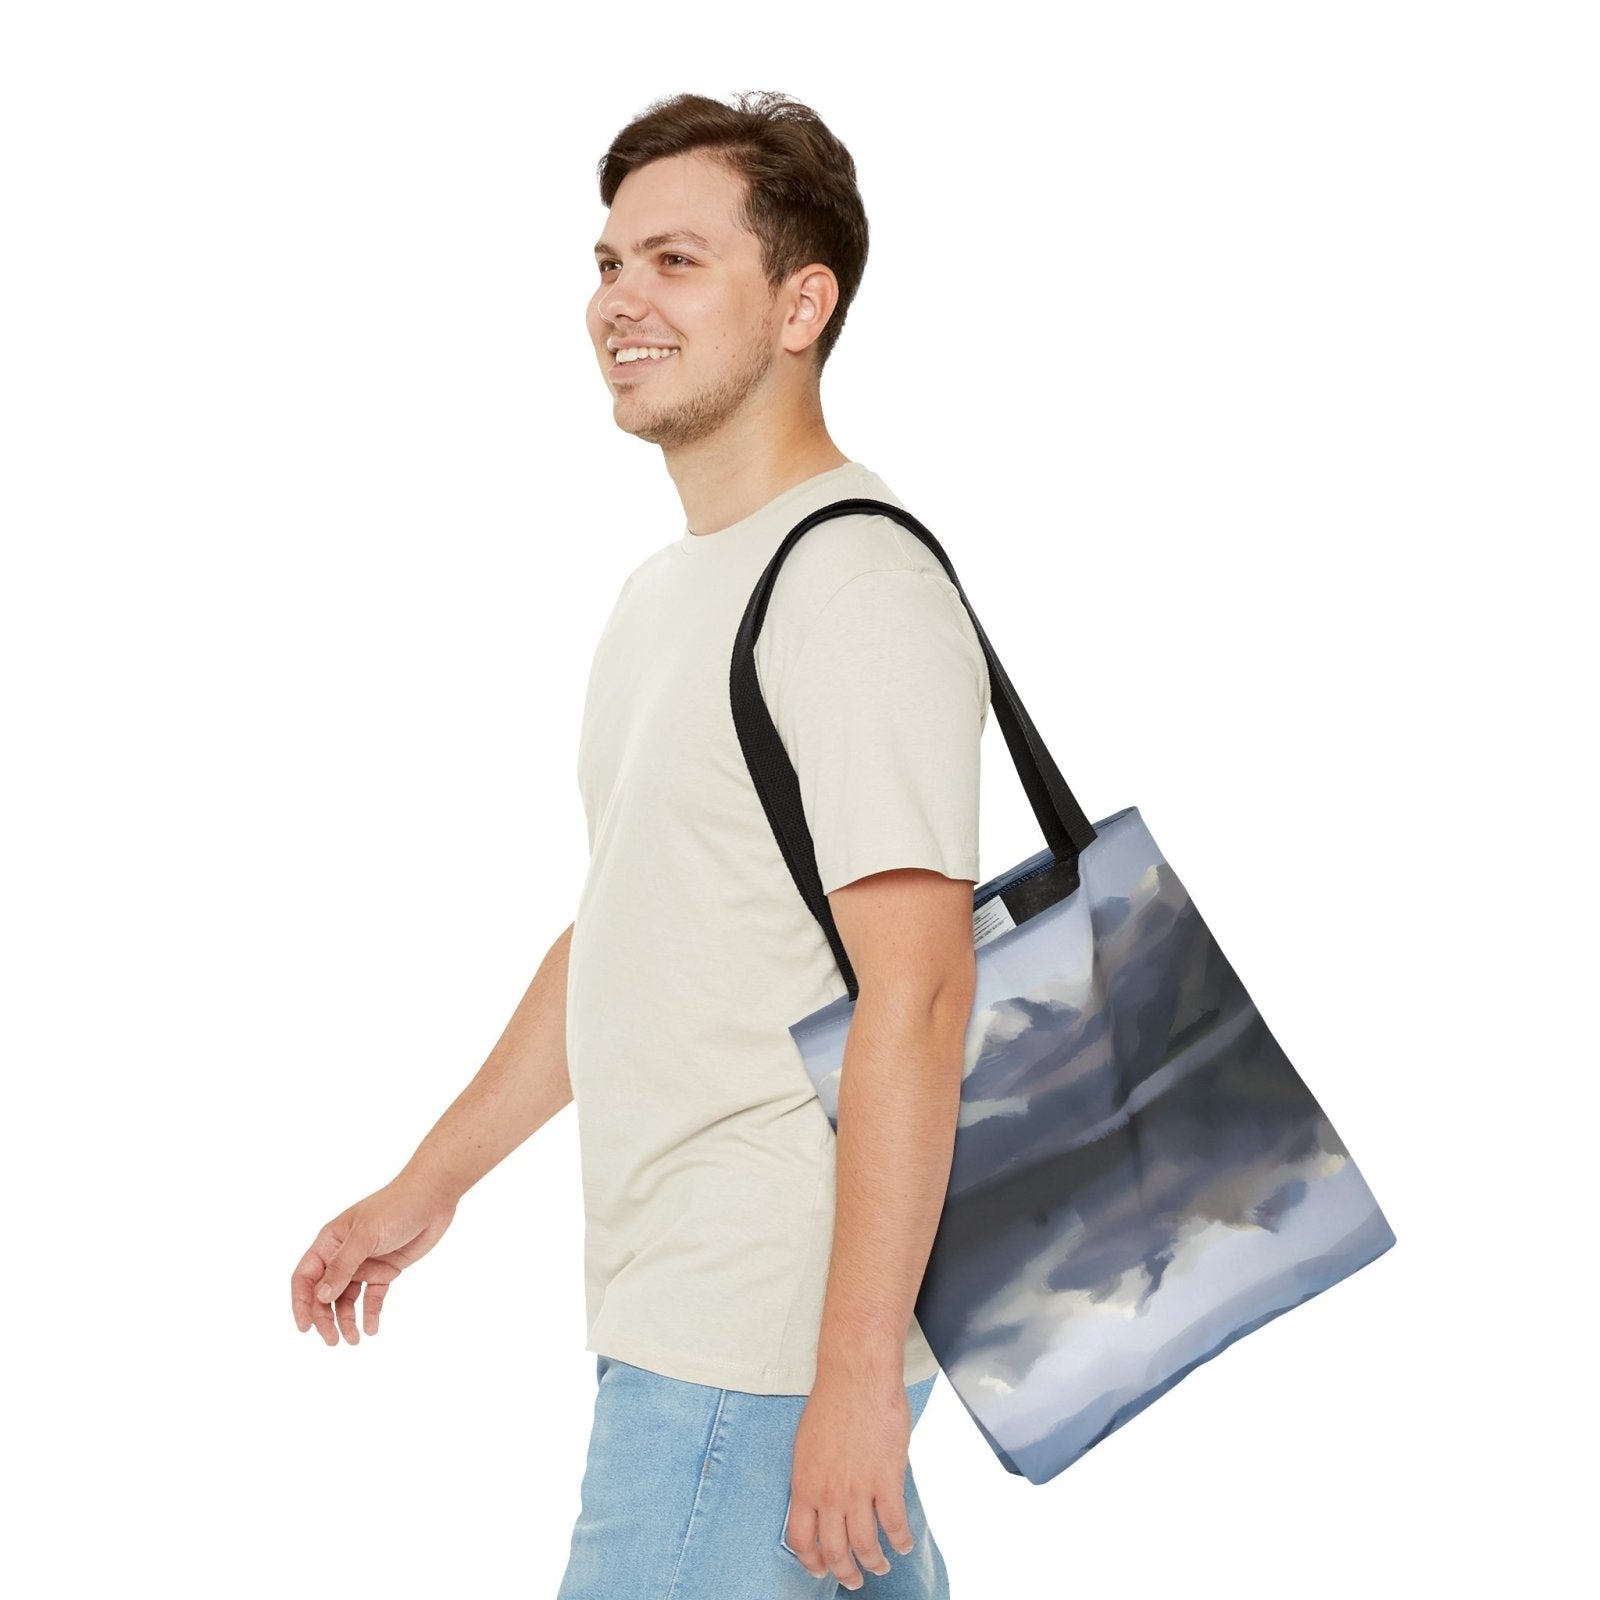 Peaceful Mountains Tote Bag, mountain inspired fashion, mountain painting tote - Subtle Blue M